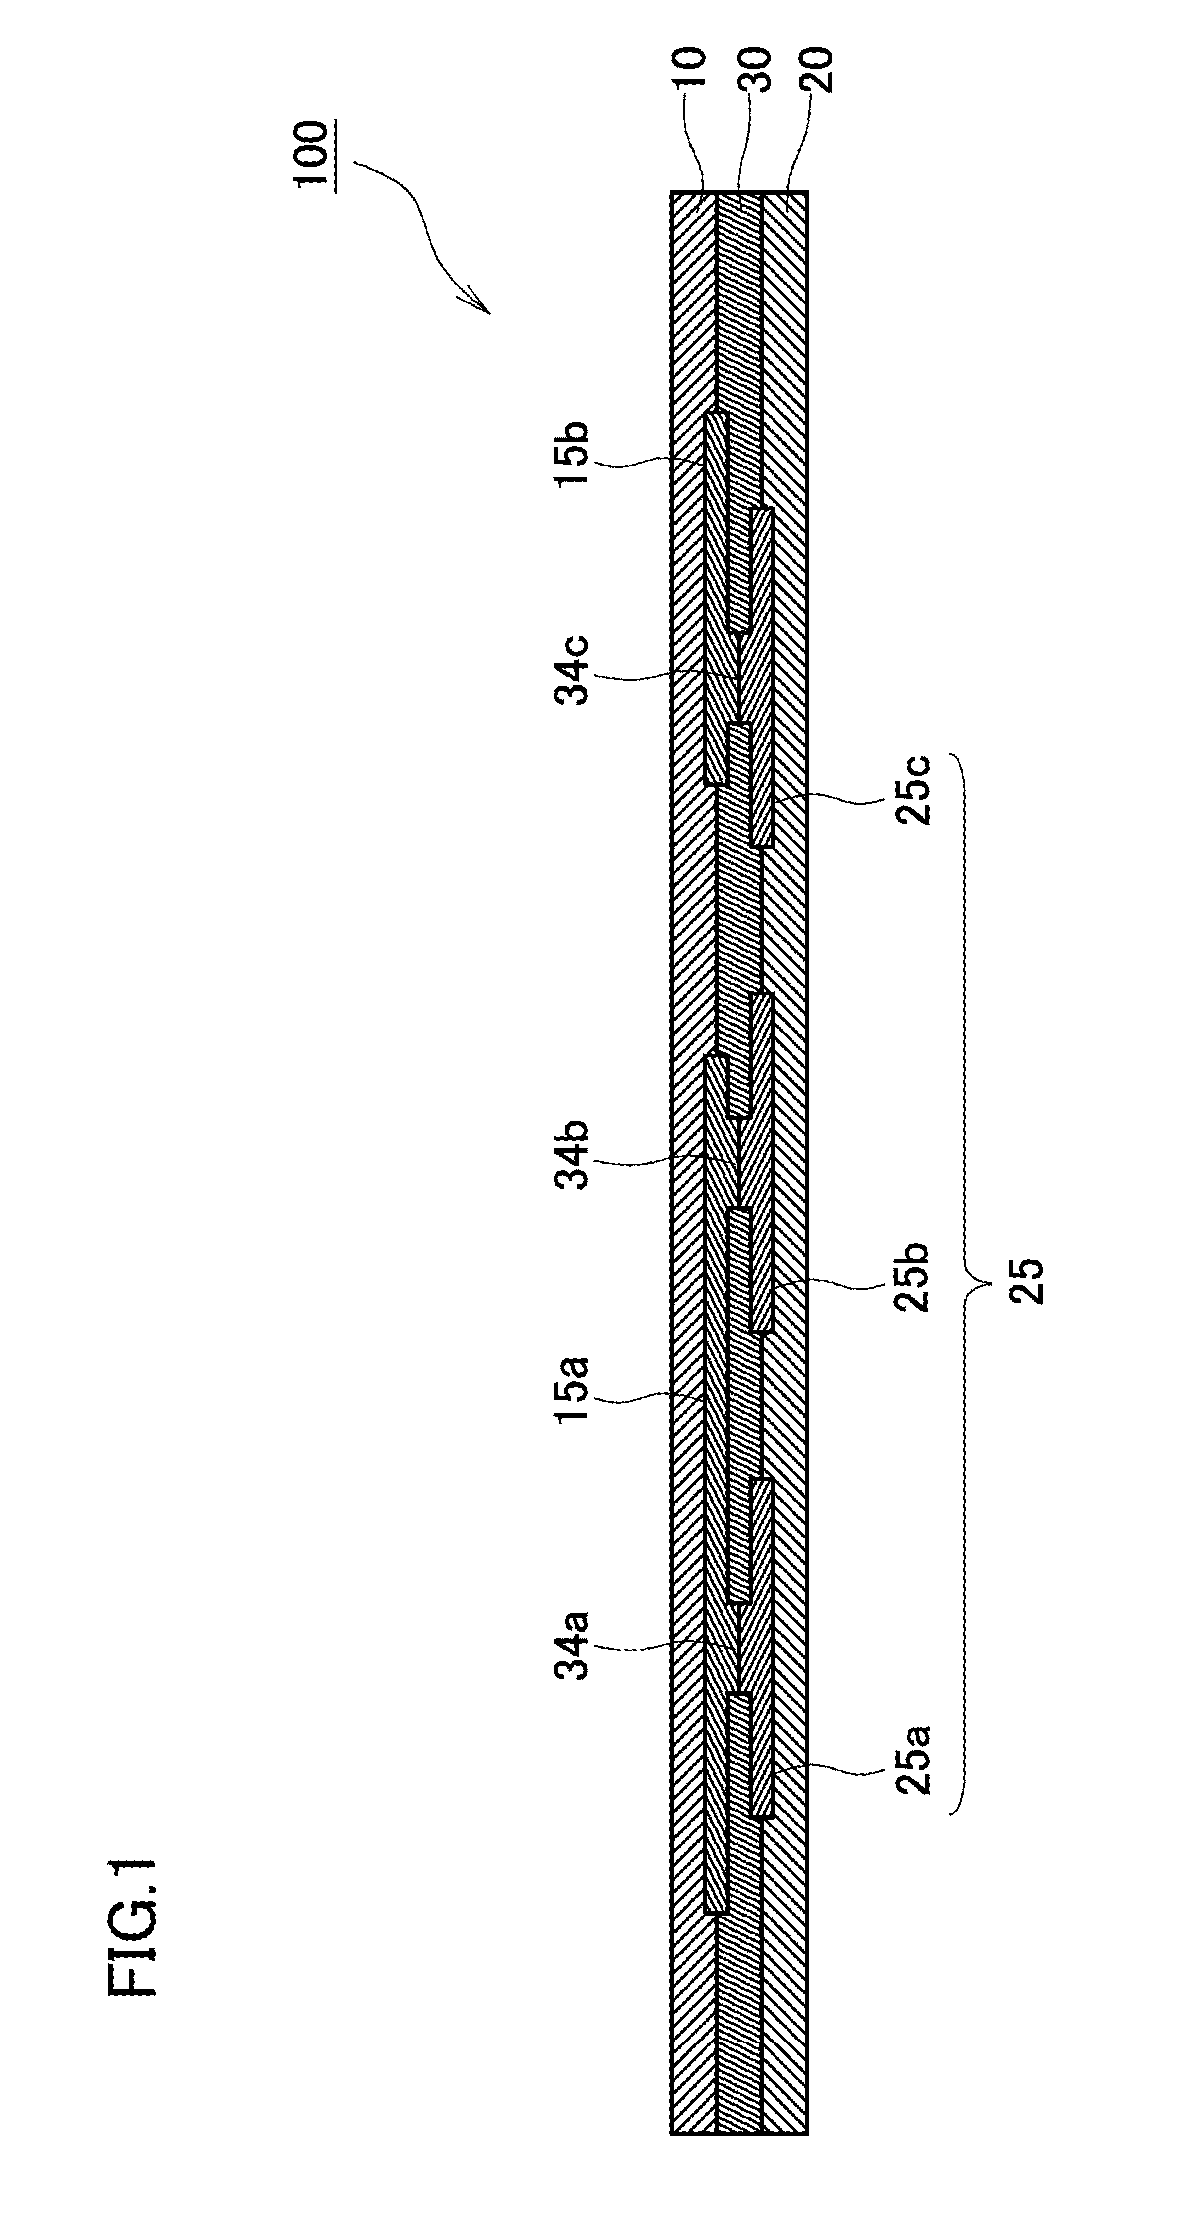 Stretchable circuit board and method for manufacturing the same